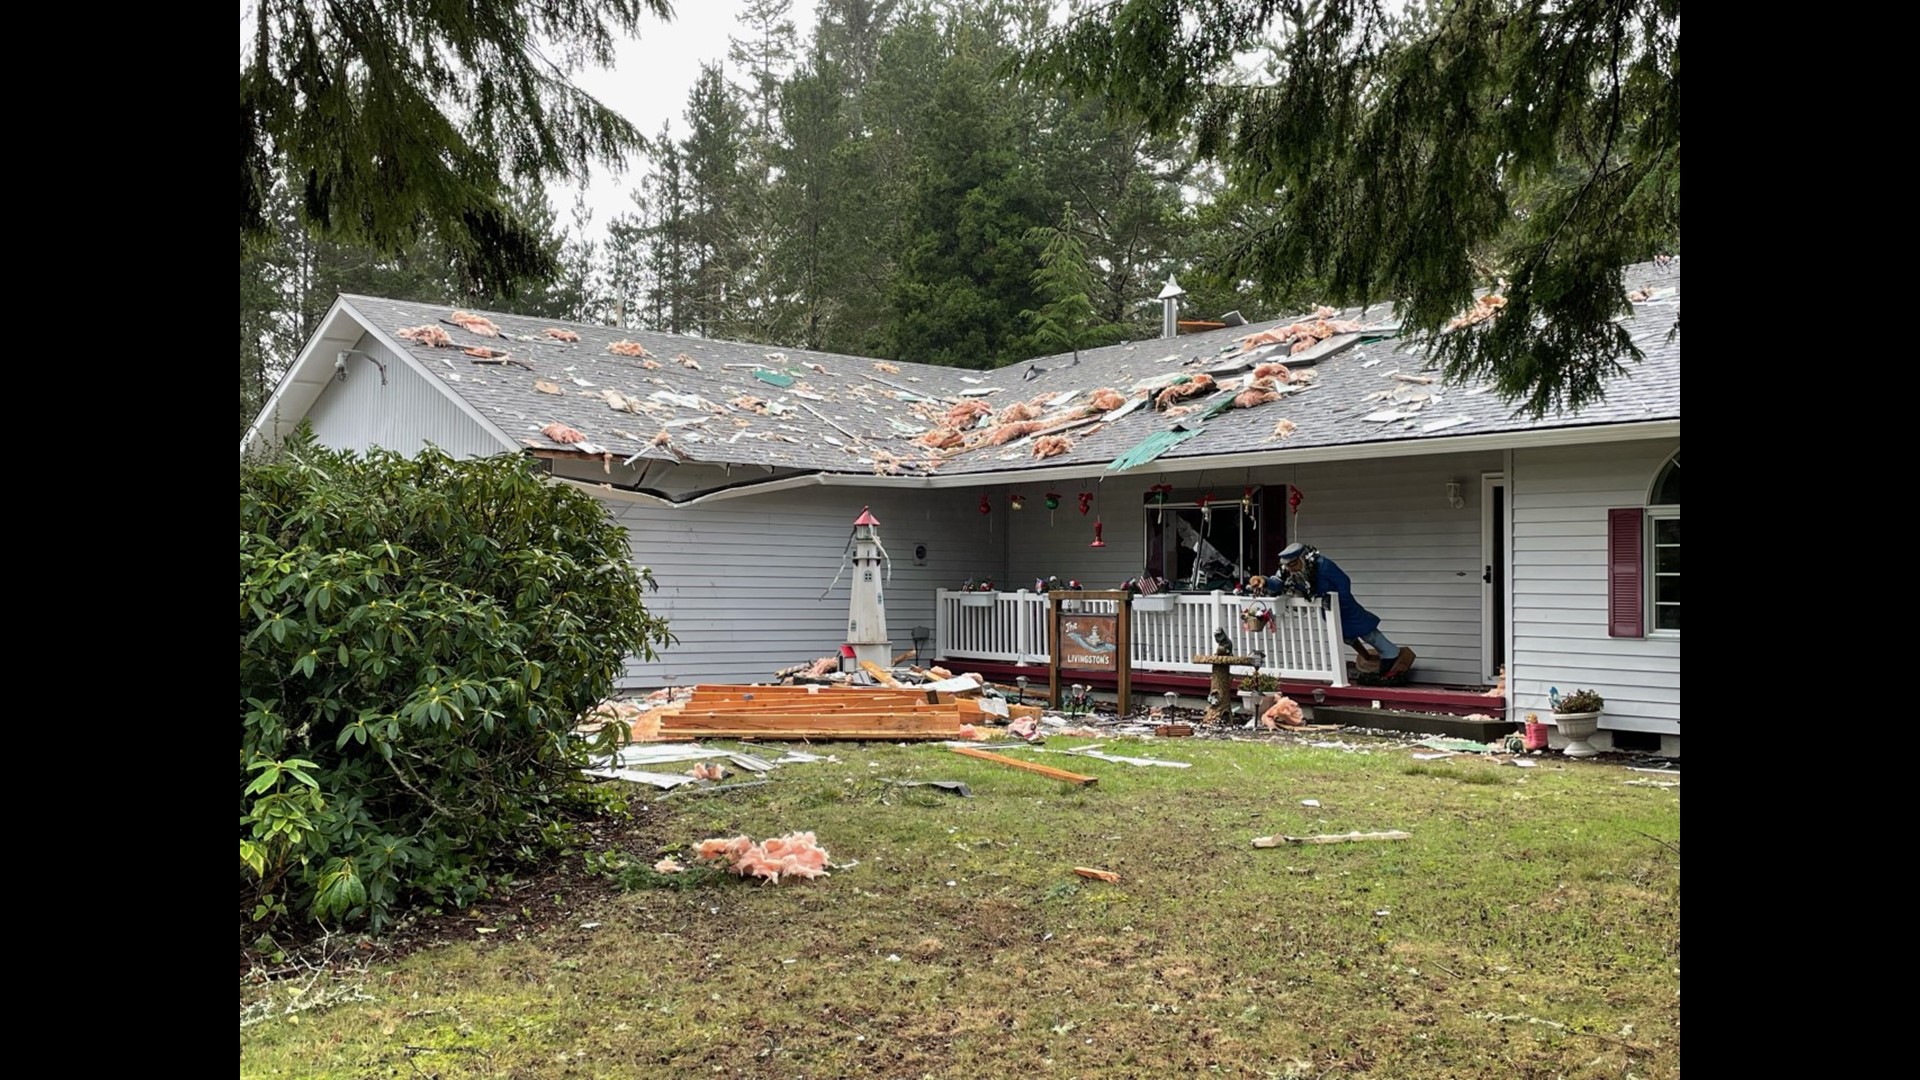 Multiple homes ‘sustained serious damage’ after a building exploded near the Washington coast in Pacific County Tuesday morning.